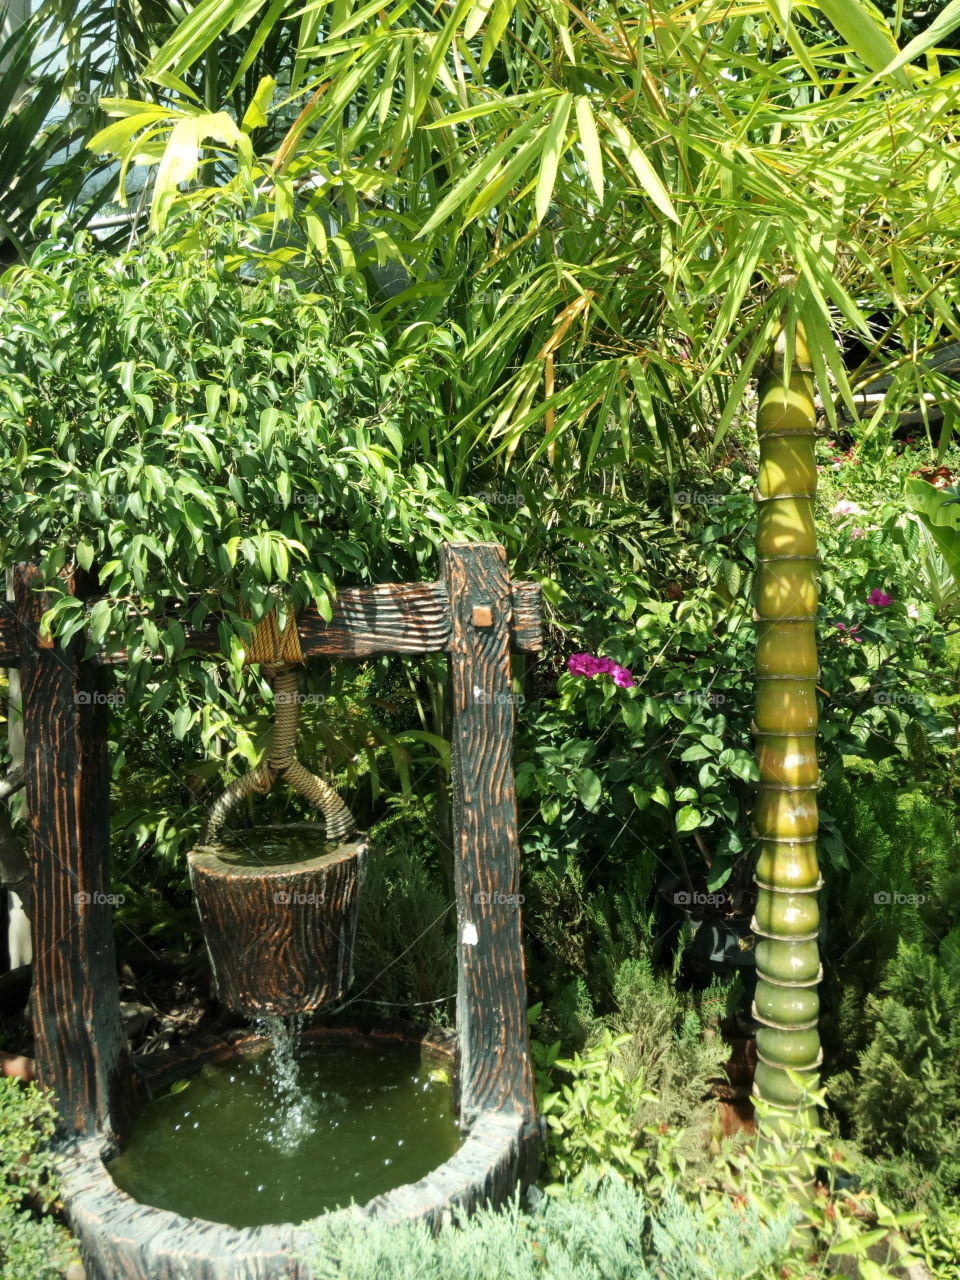 THE BAMBOO AND THE WELL